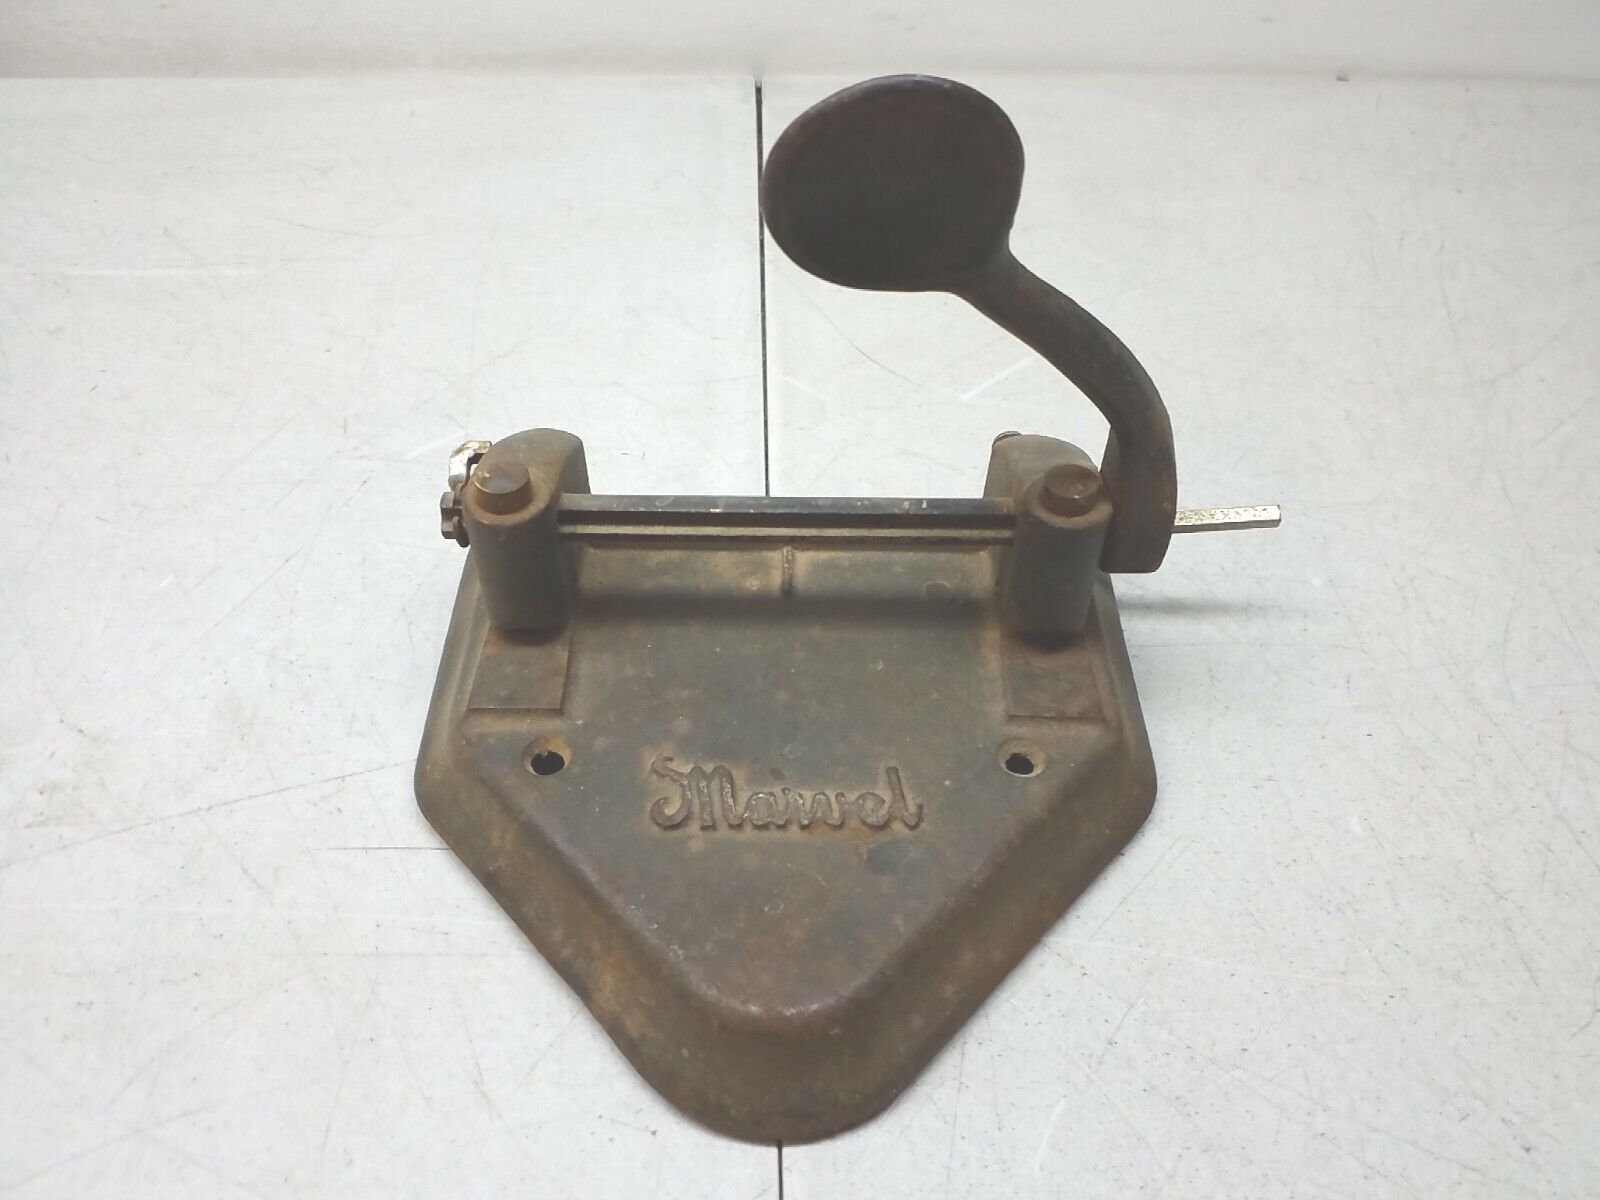 Marvel 2 Hole Punch By Wilson Jones Vintage Made In Chicago Illinois USA 